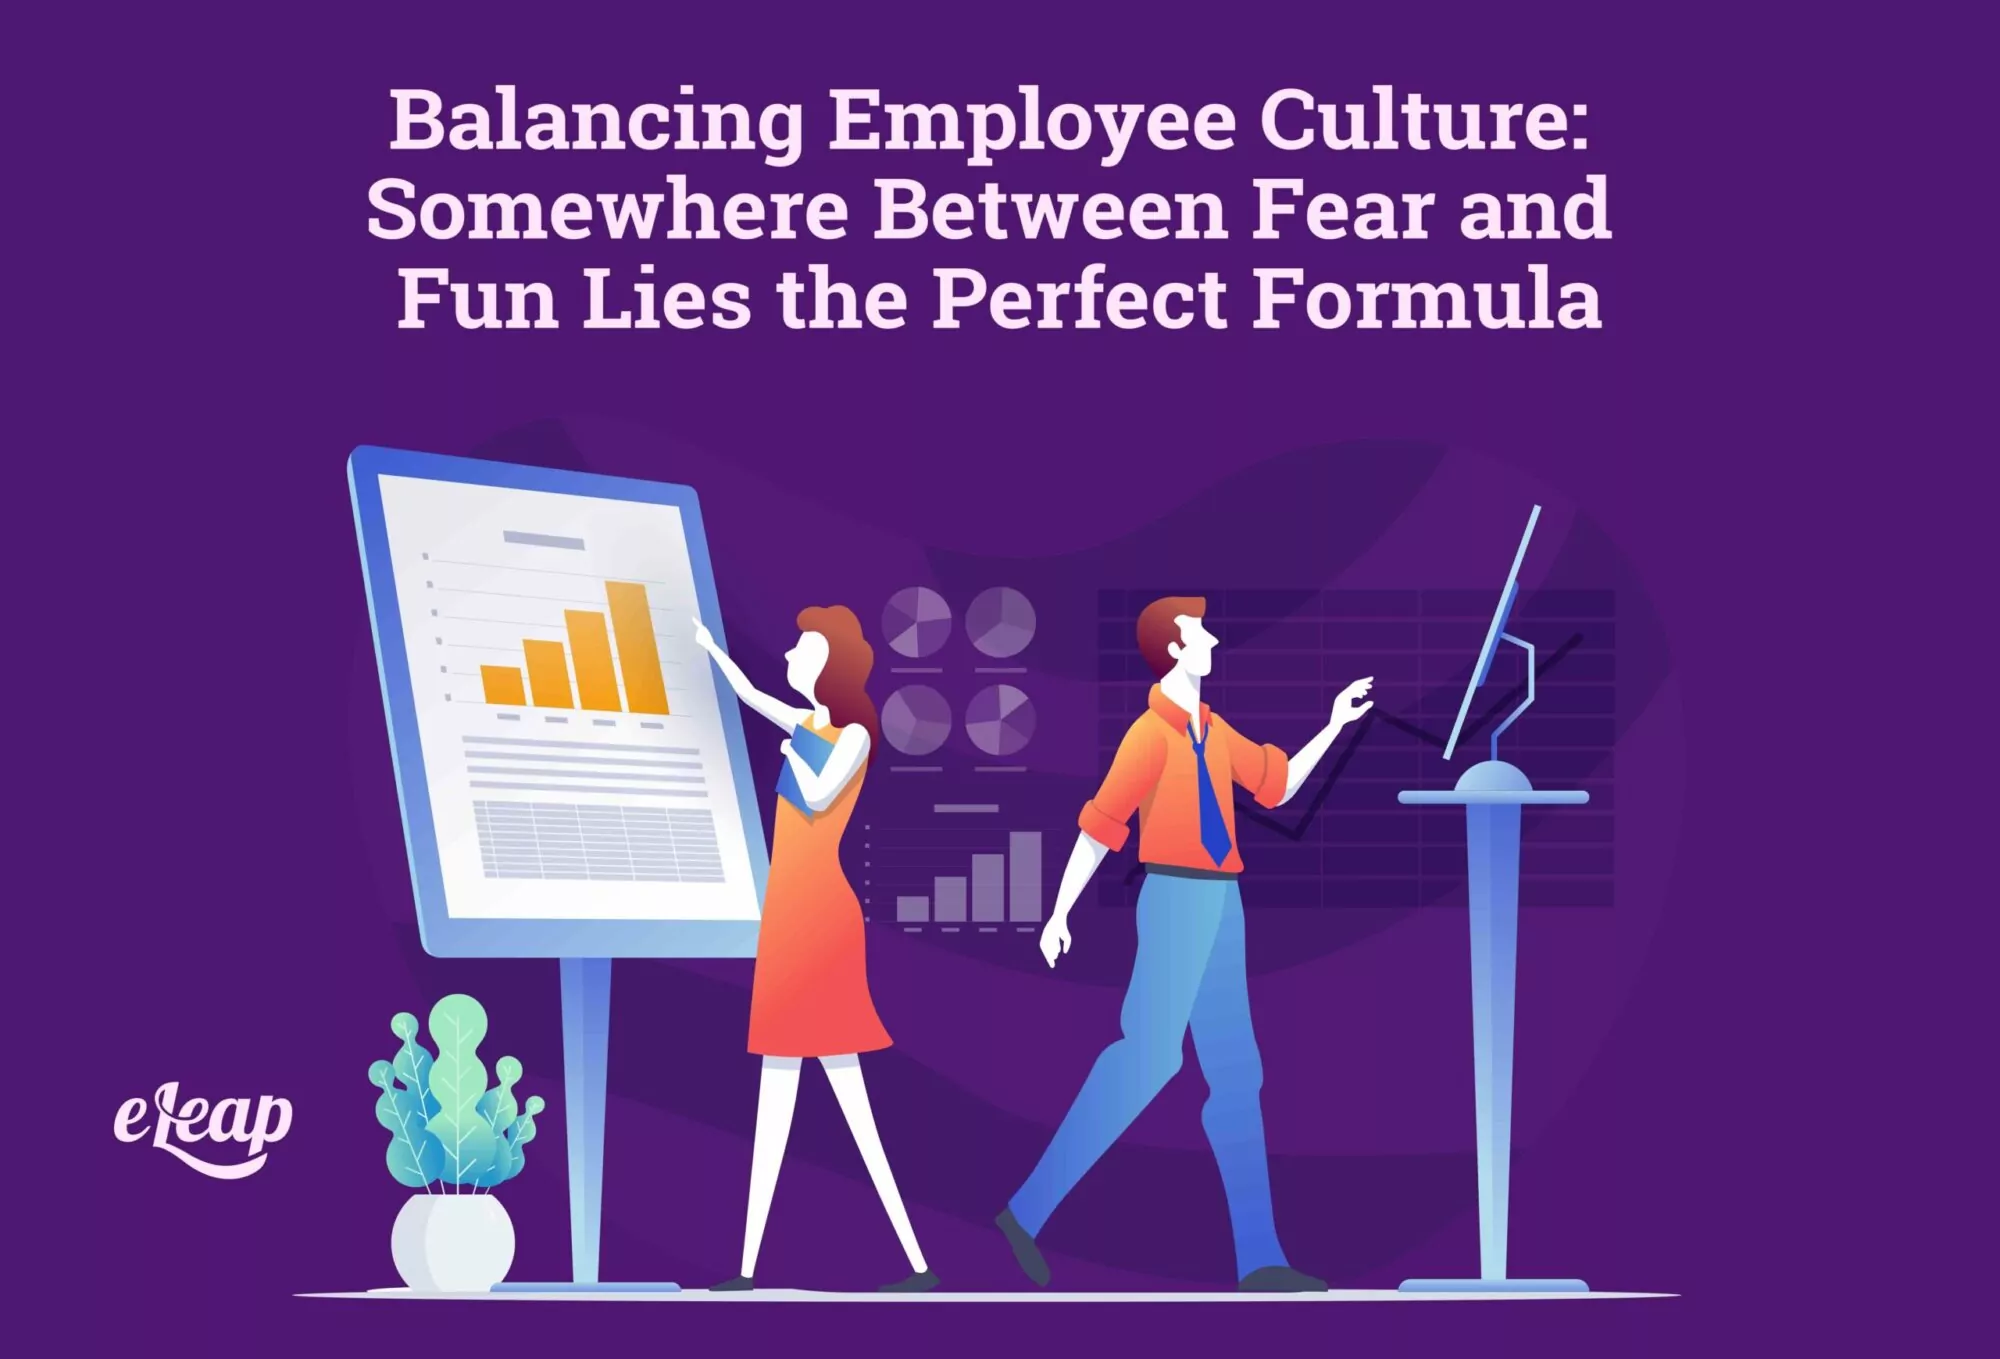 Balancing Employee Culture: Somewhere Between Fear and Fun Lies the Perfect Formula